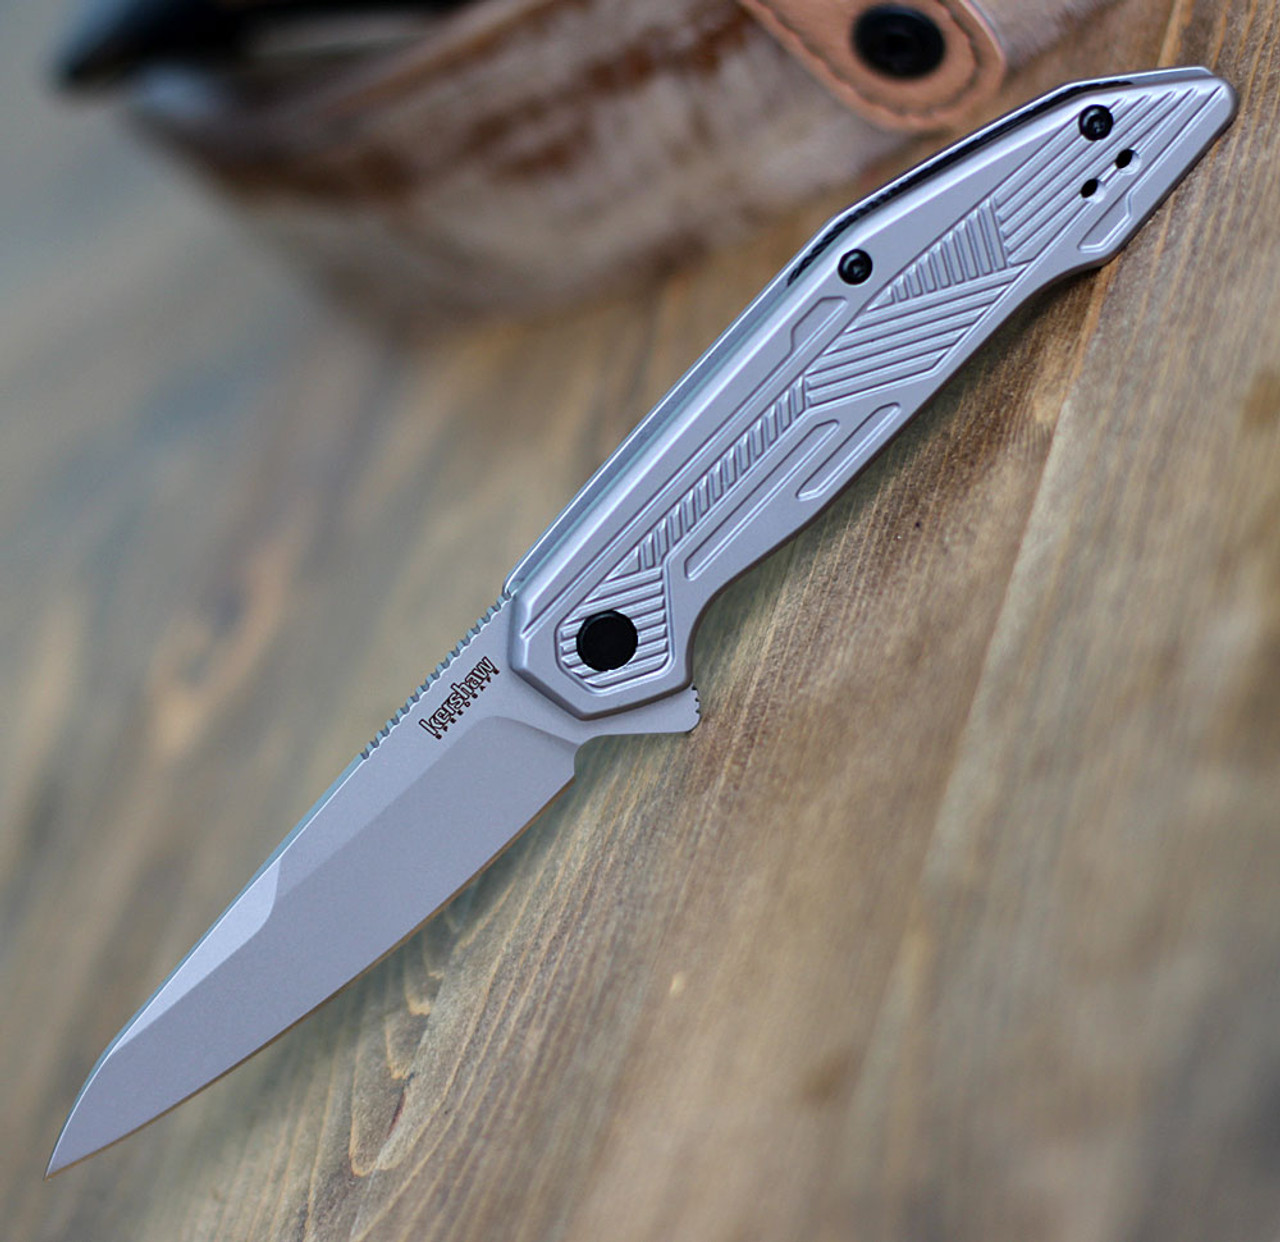 Kershaw Terran Assisted Opening Knife (2080)- 3.125" Stonewashed 8Cr13MoV Drop Point Blade, Stonewashed Stainless Steel Handle